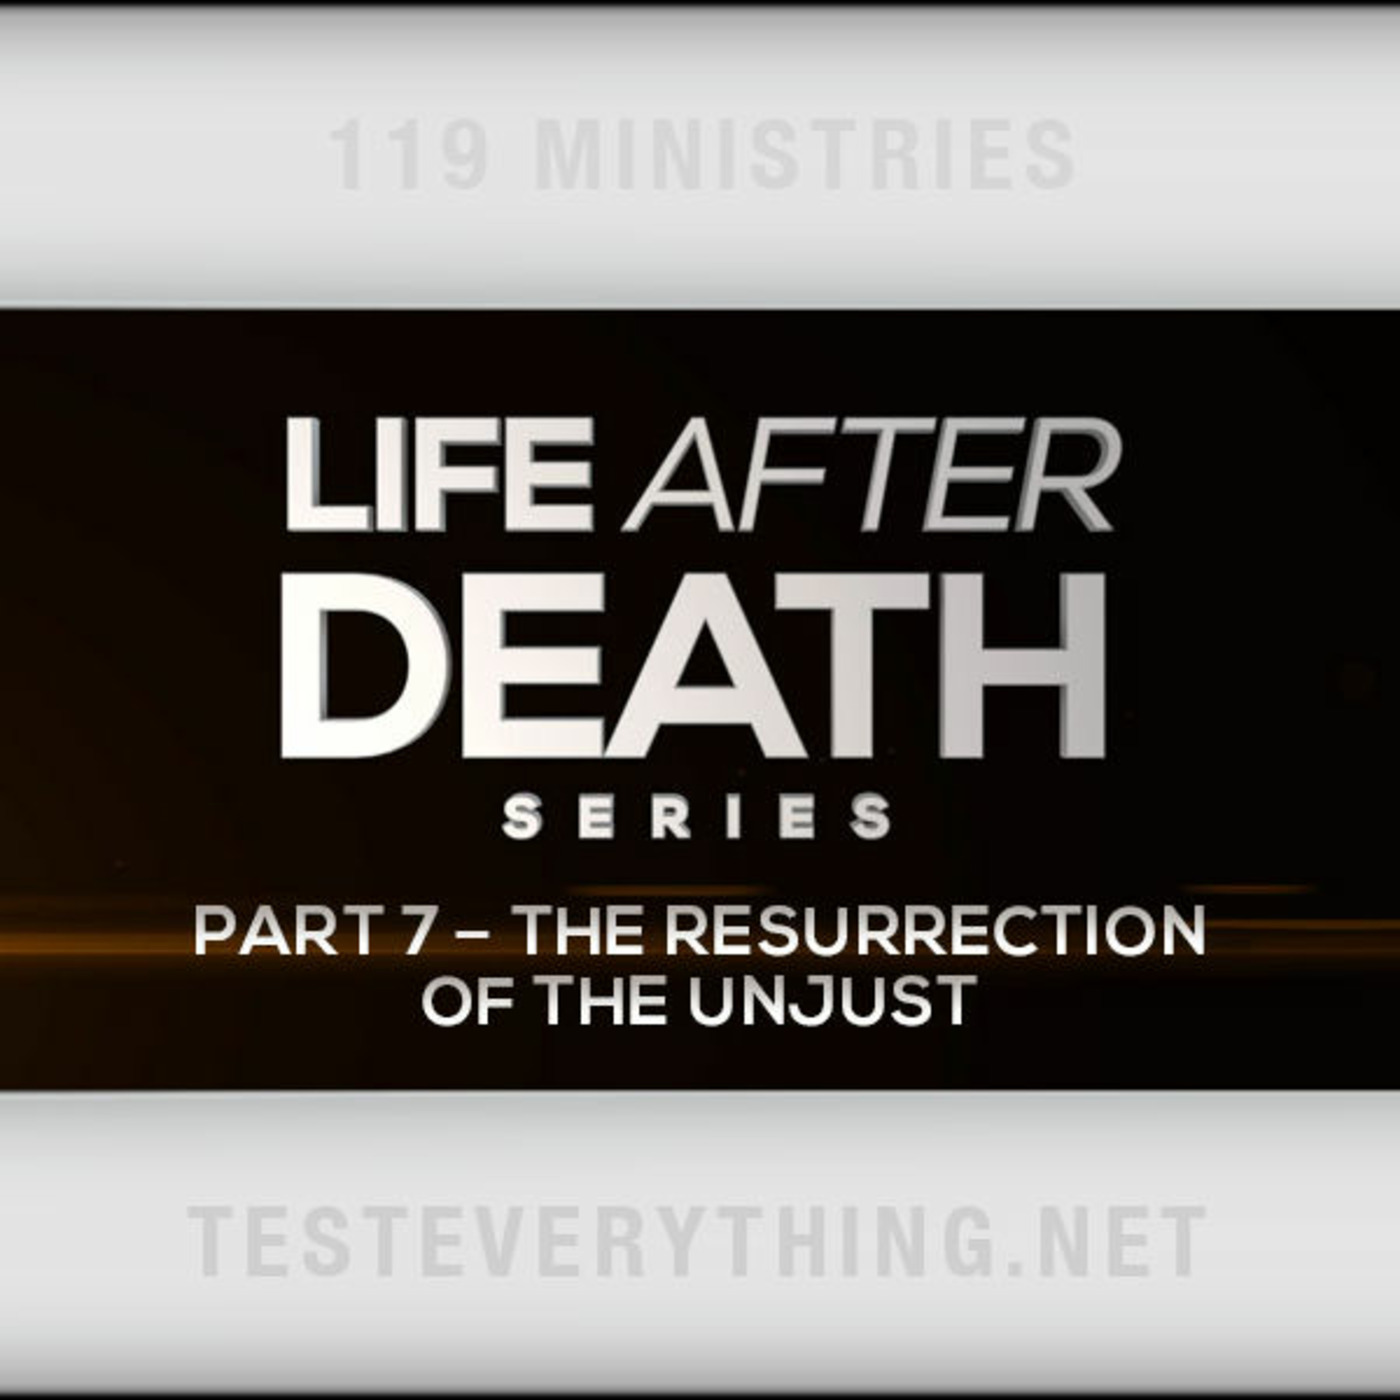 Life After Death Part 7 - The Resurrection of the Unjust